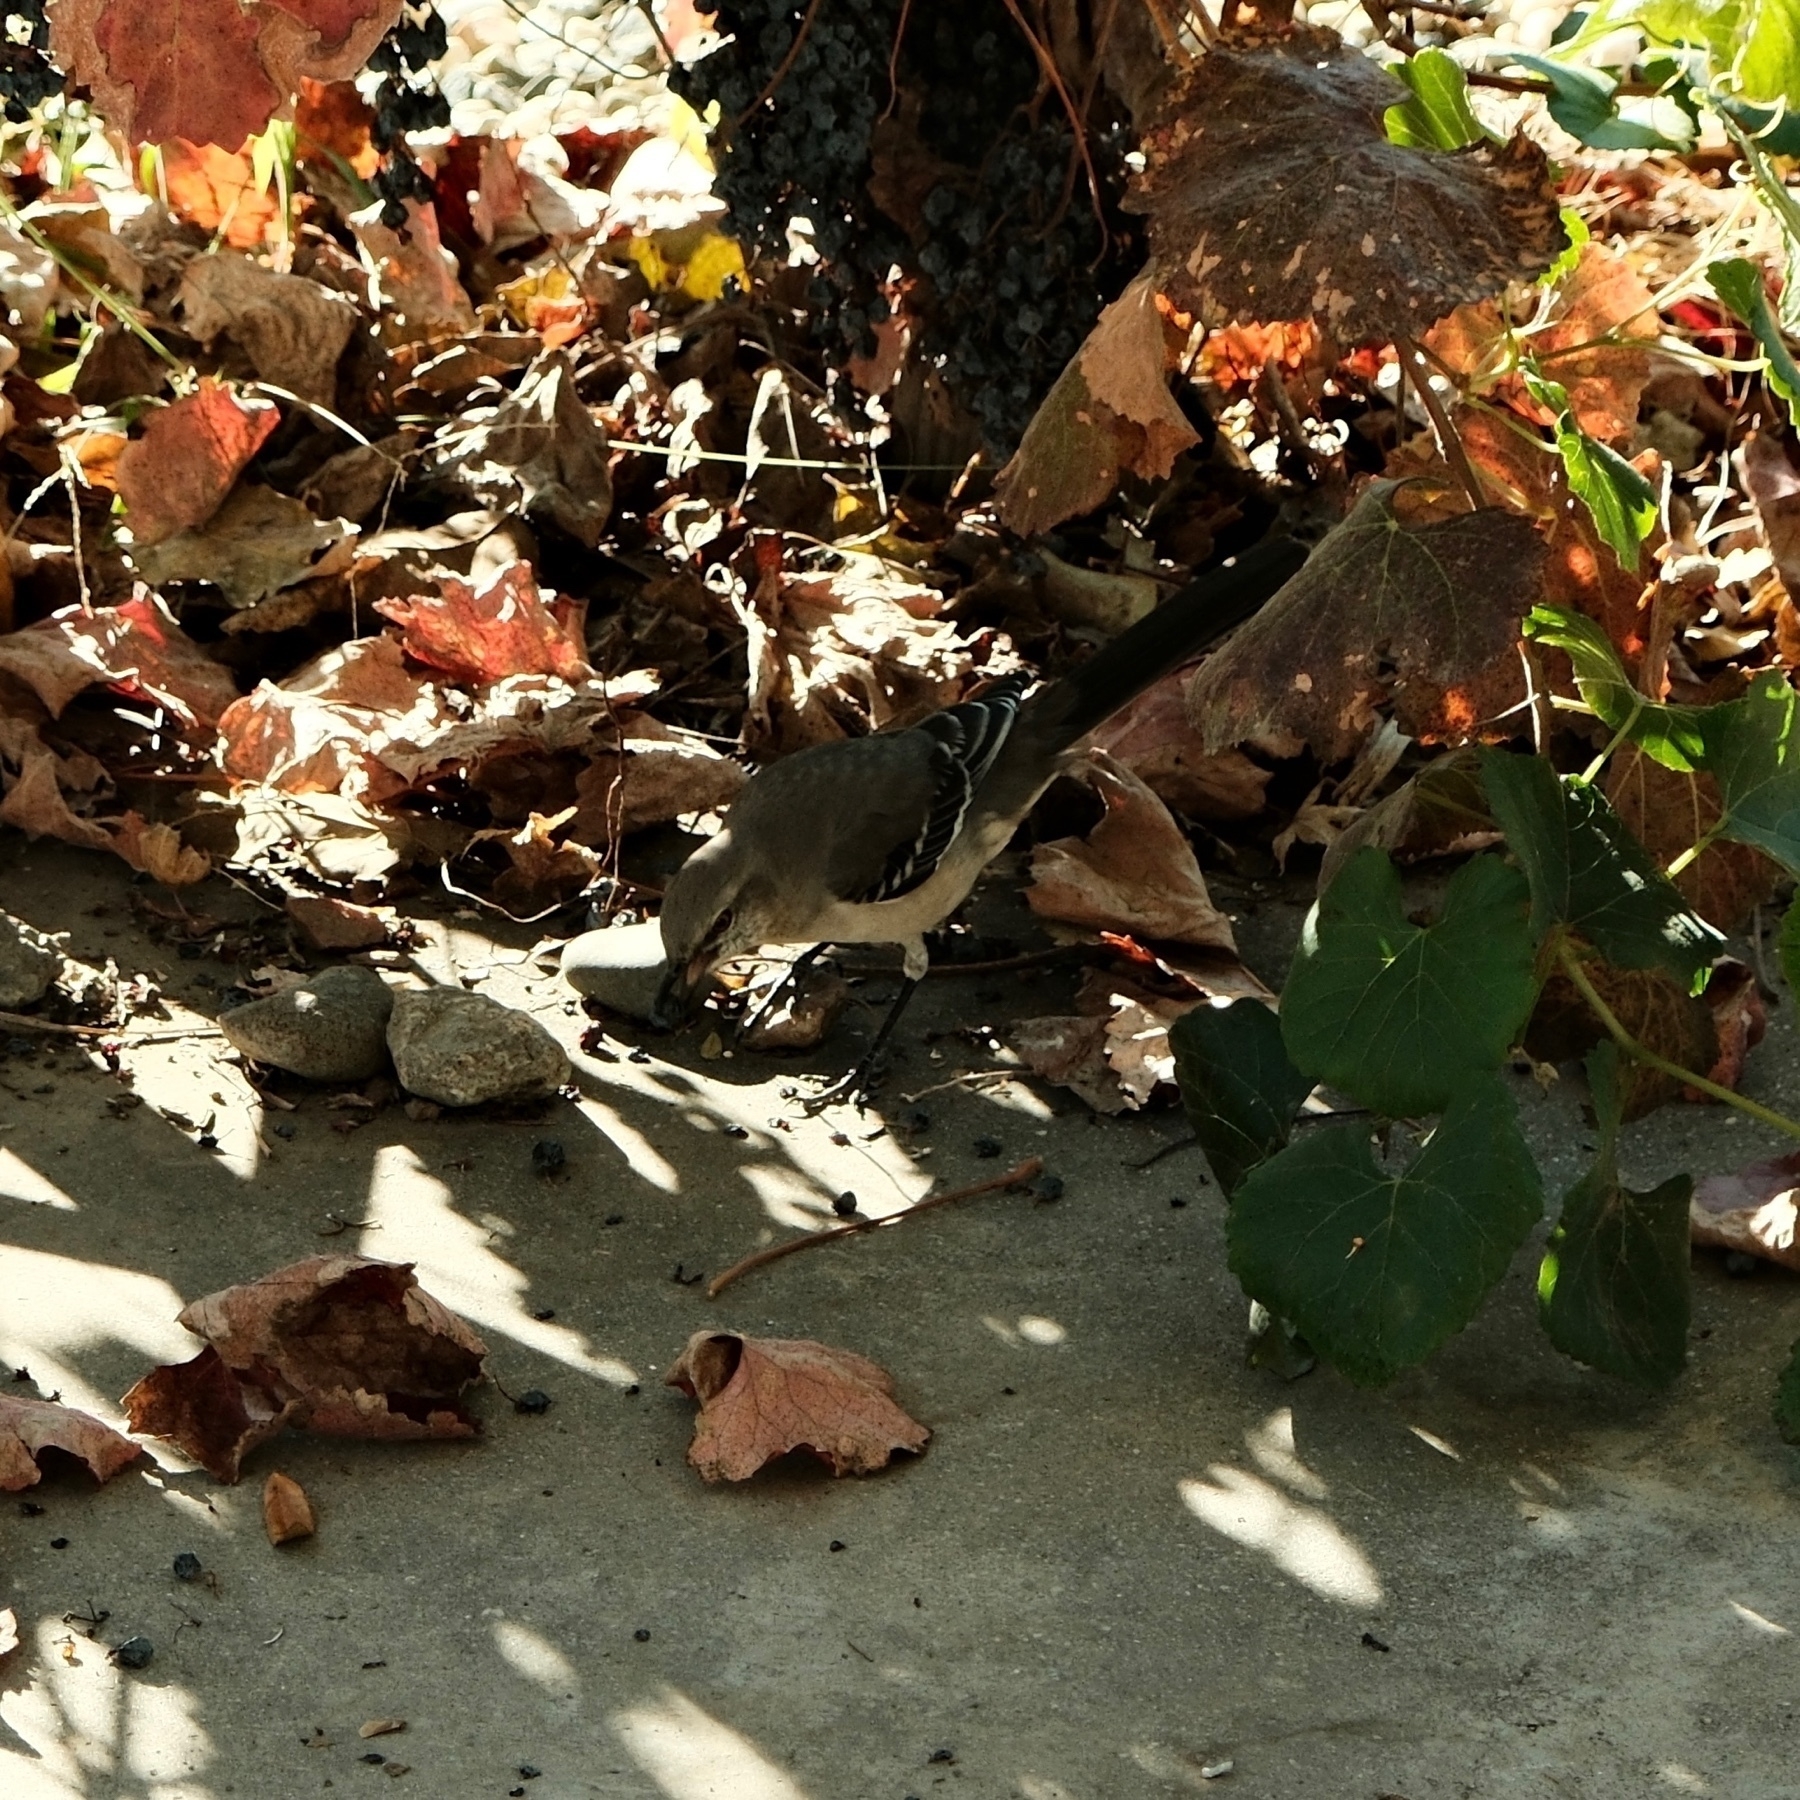 black, gray and white mockingbird in the shadow of a senescing grape plant with a dessicated grape in its beak.